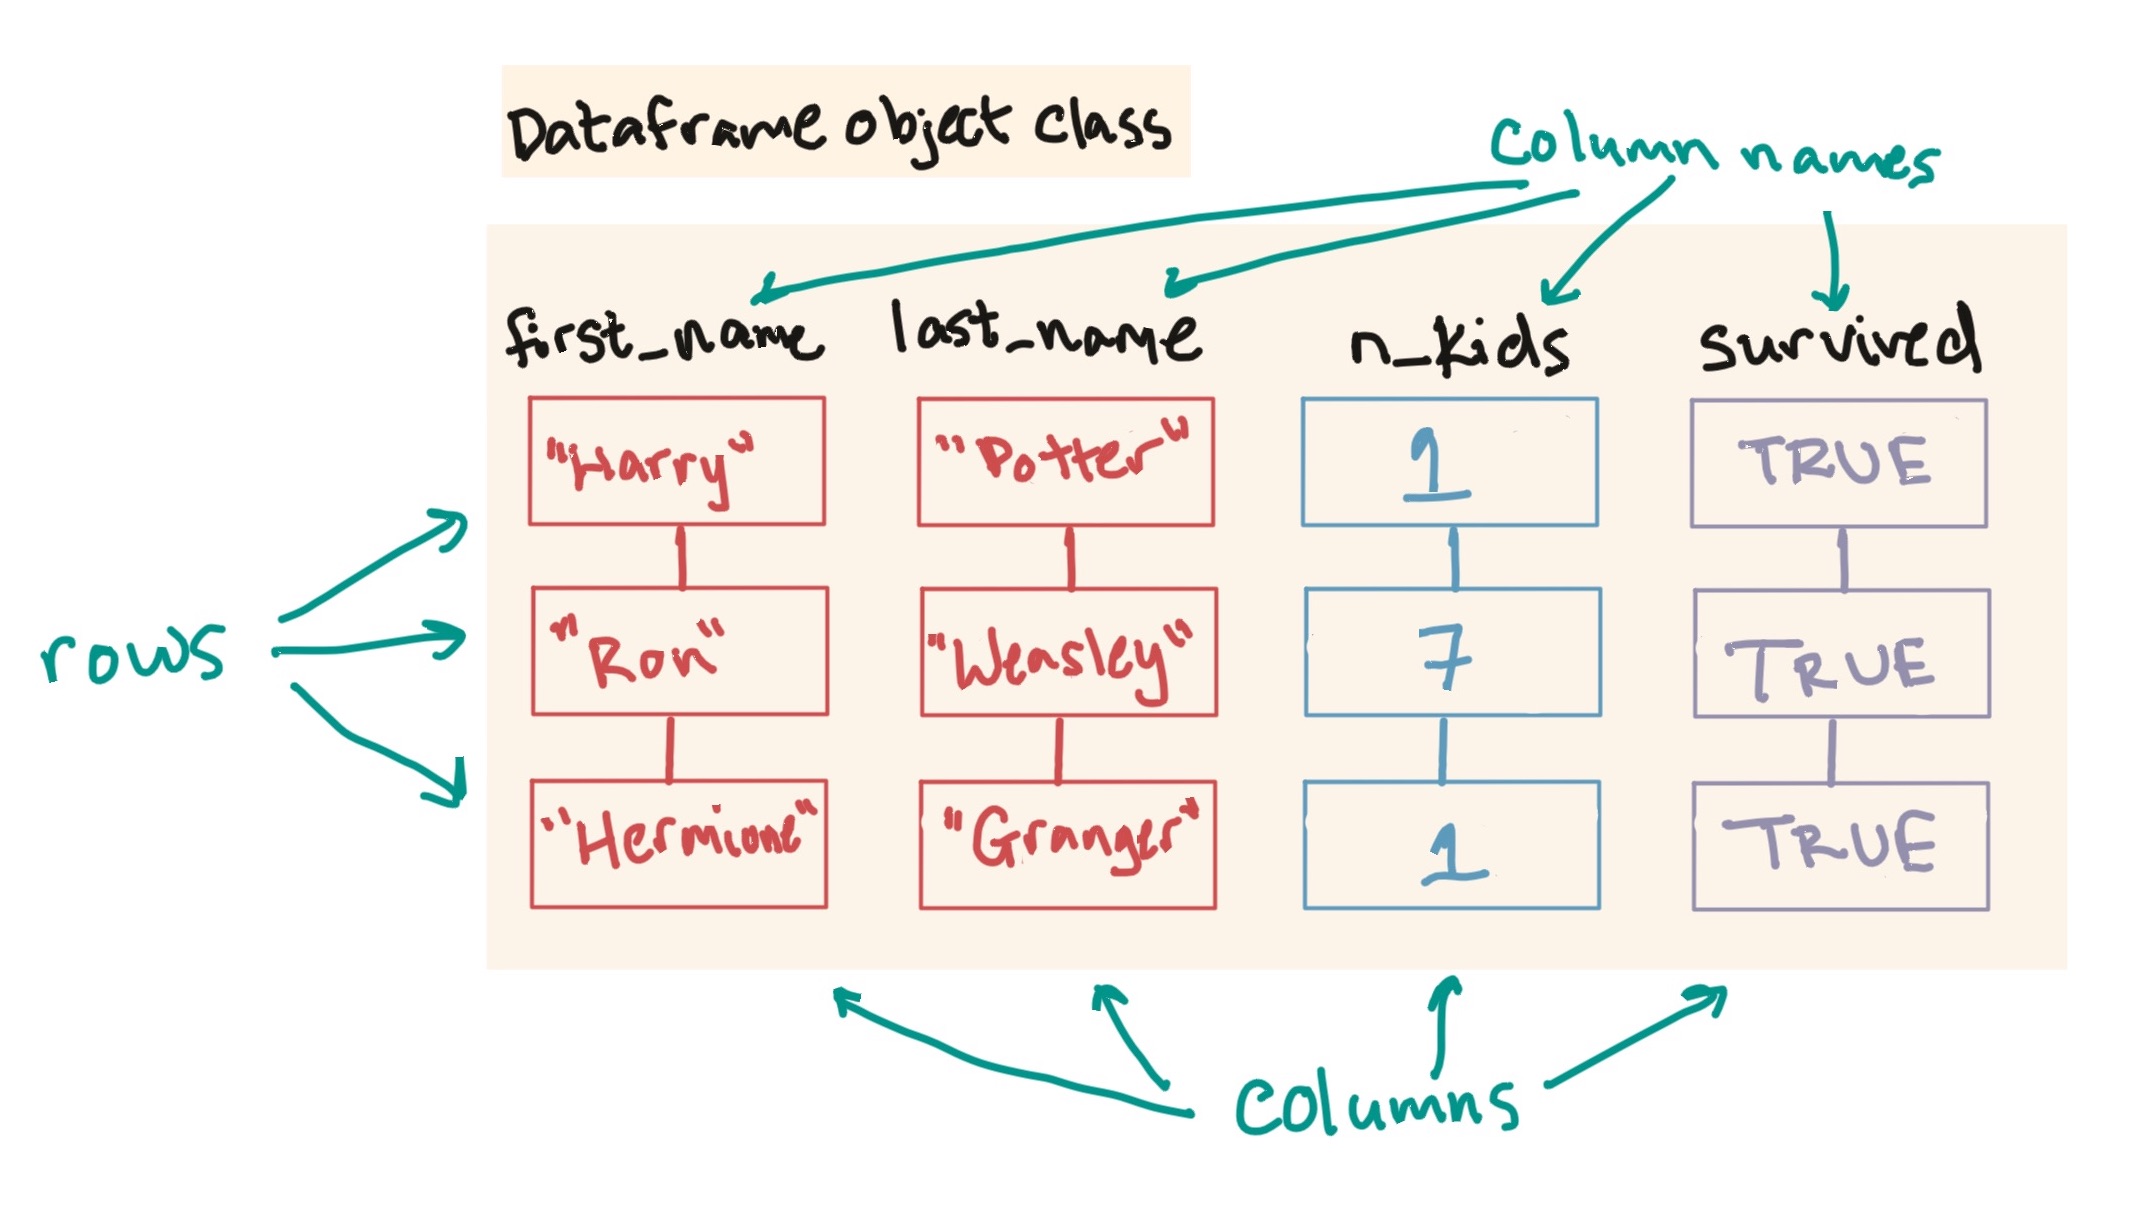 The elements of a dataframe: columns, rows, and column names.